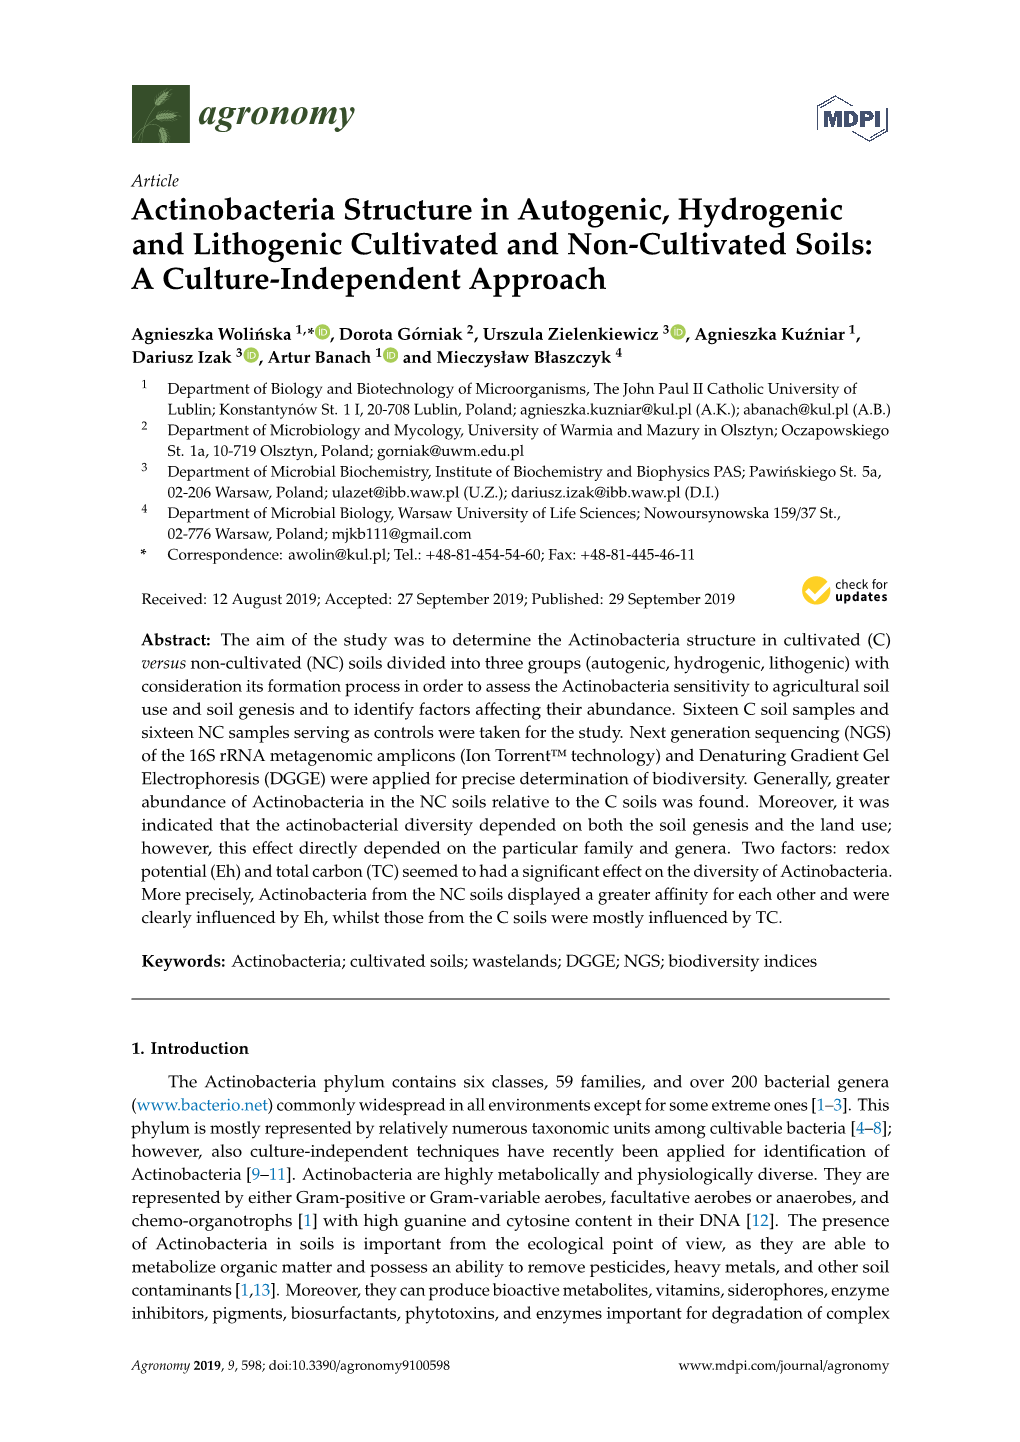 Actinobacteria Structure in Autogenic, Hydrogenic and Lithogenic Cultivated and Non-Cultivated Soils: a Culture-Independent Approach